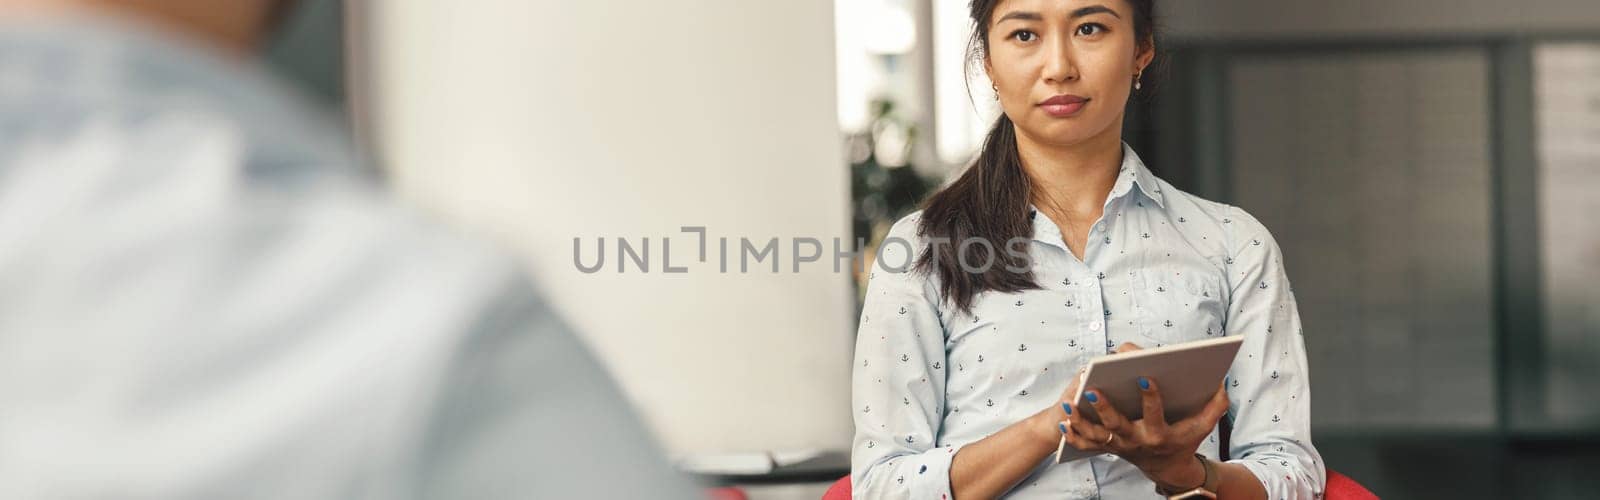 HR manager holding digital tablet and looking on job candidate during interview. High quality photo